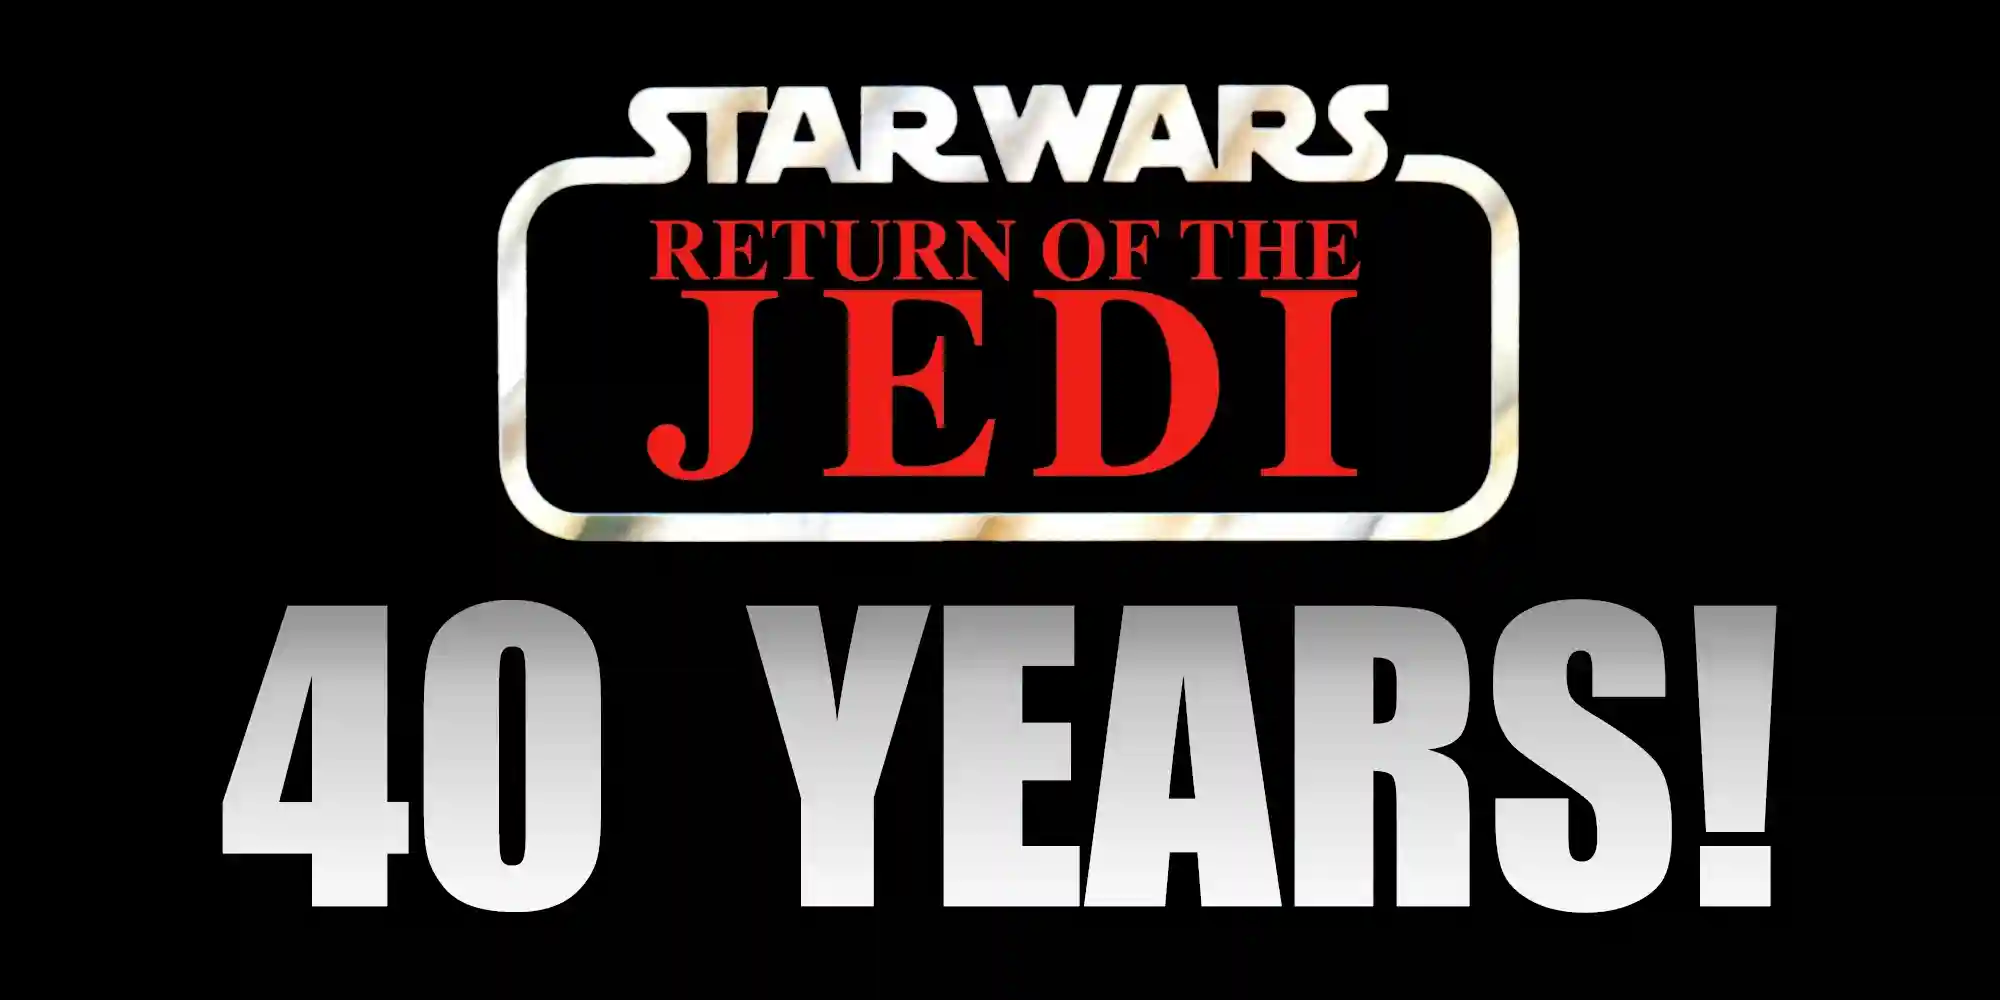 40 Years Of Return Of The Jedi Toys!